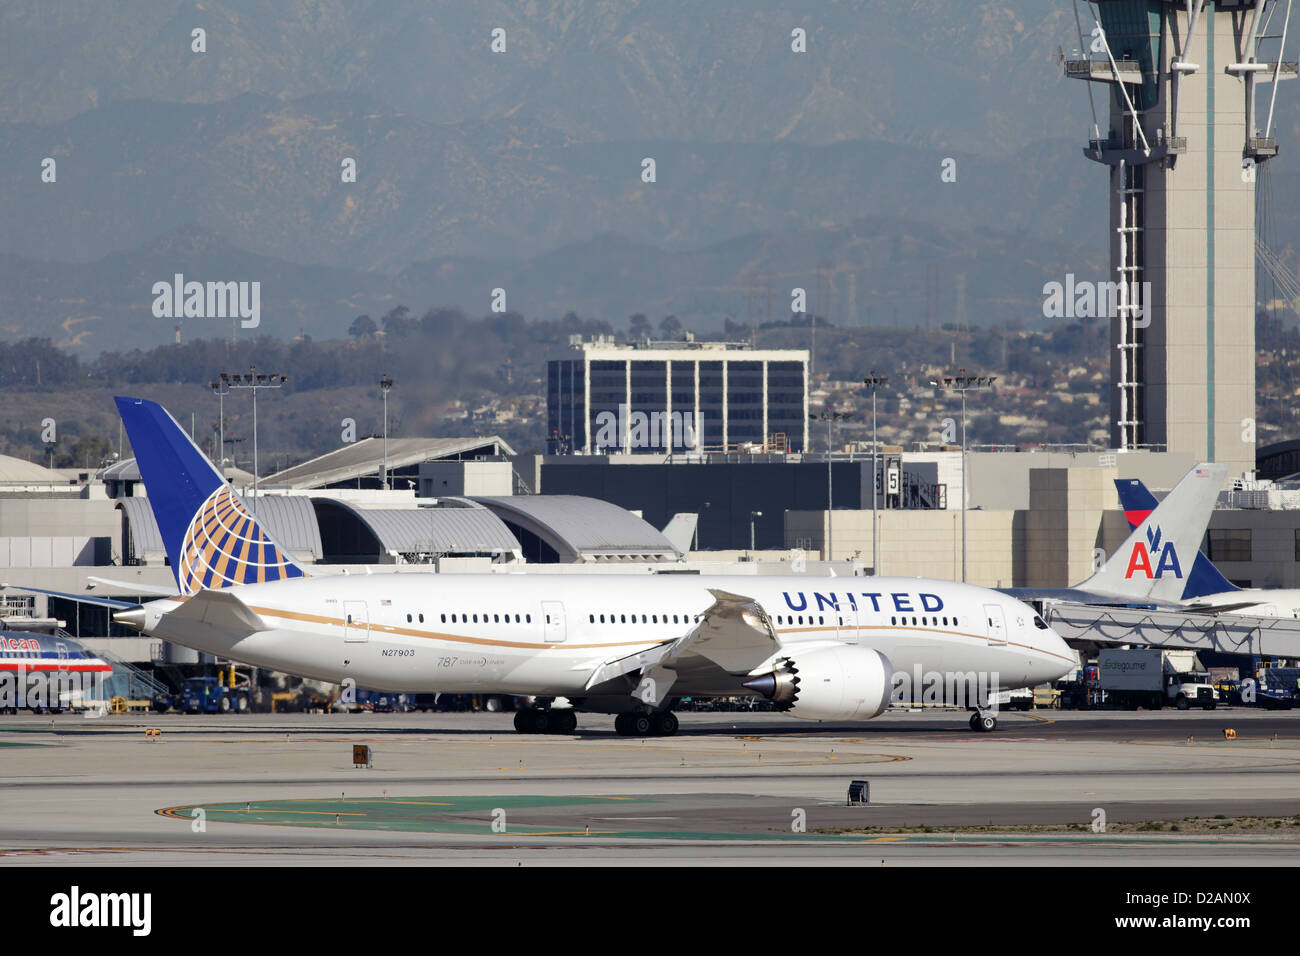 LOS ANGELES, CALIFORNIA, USA - JANUARY 15, 2013 - United Airlines Boeing 787-8 Dreamliner taxis at Los Angeles Airport Stock Photo